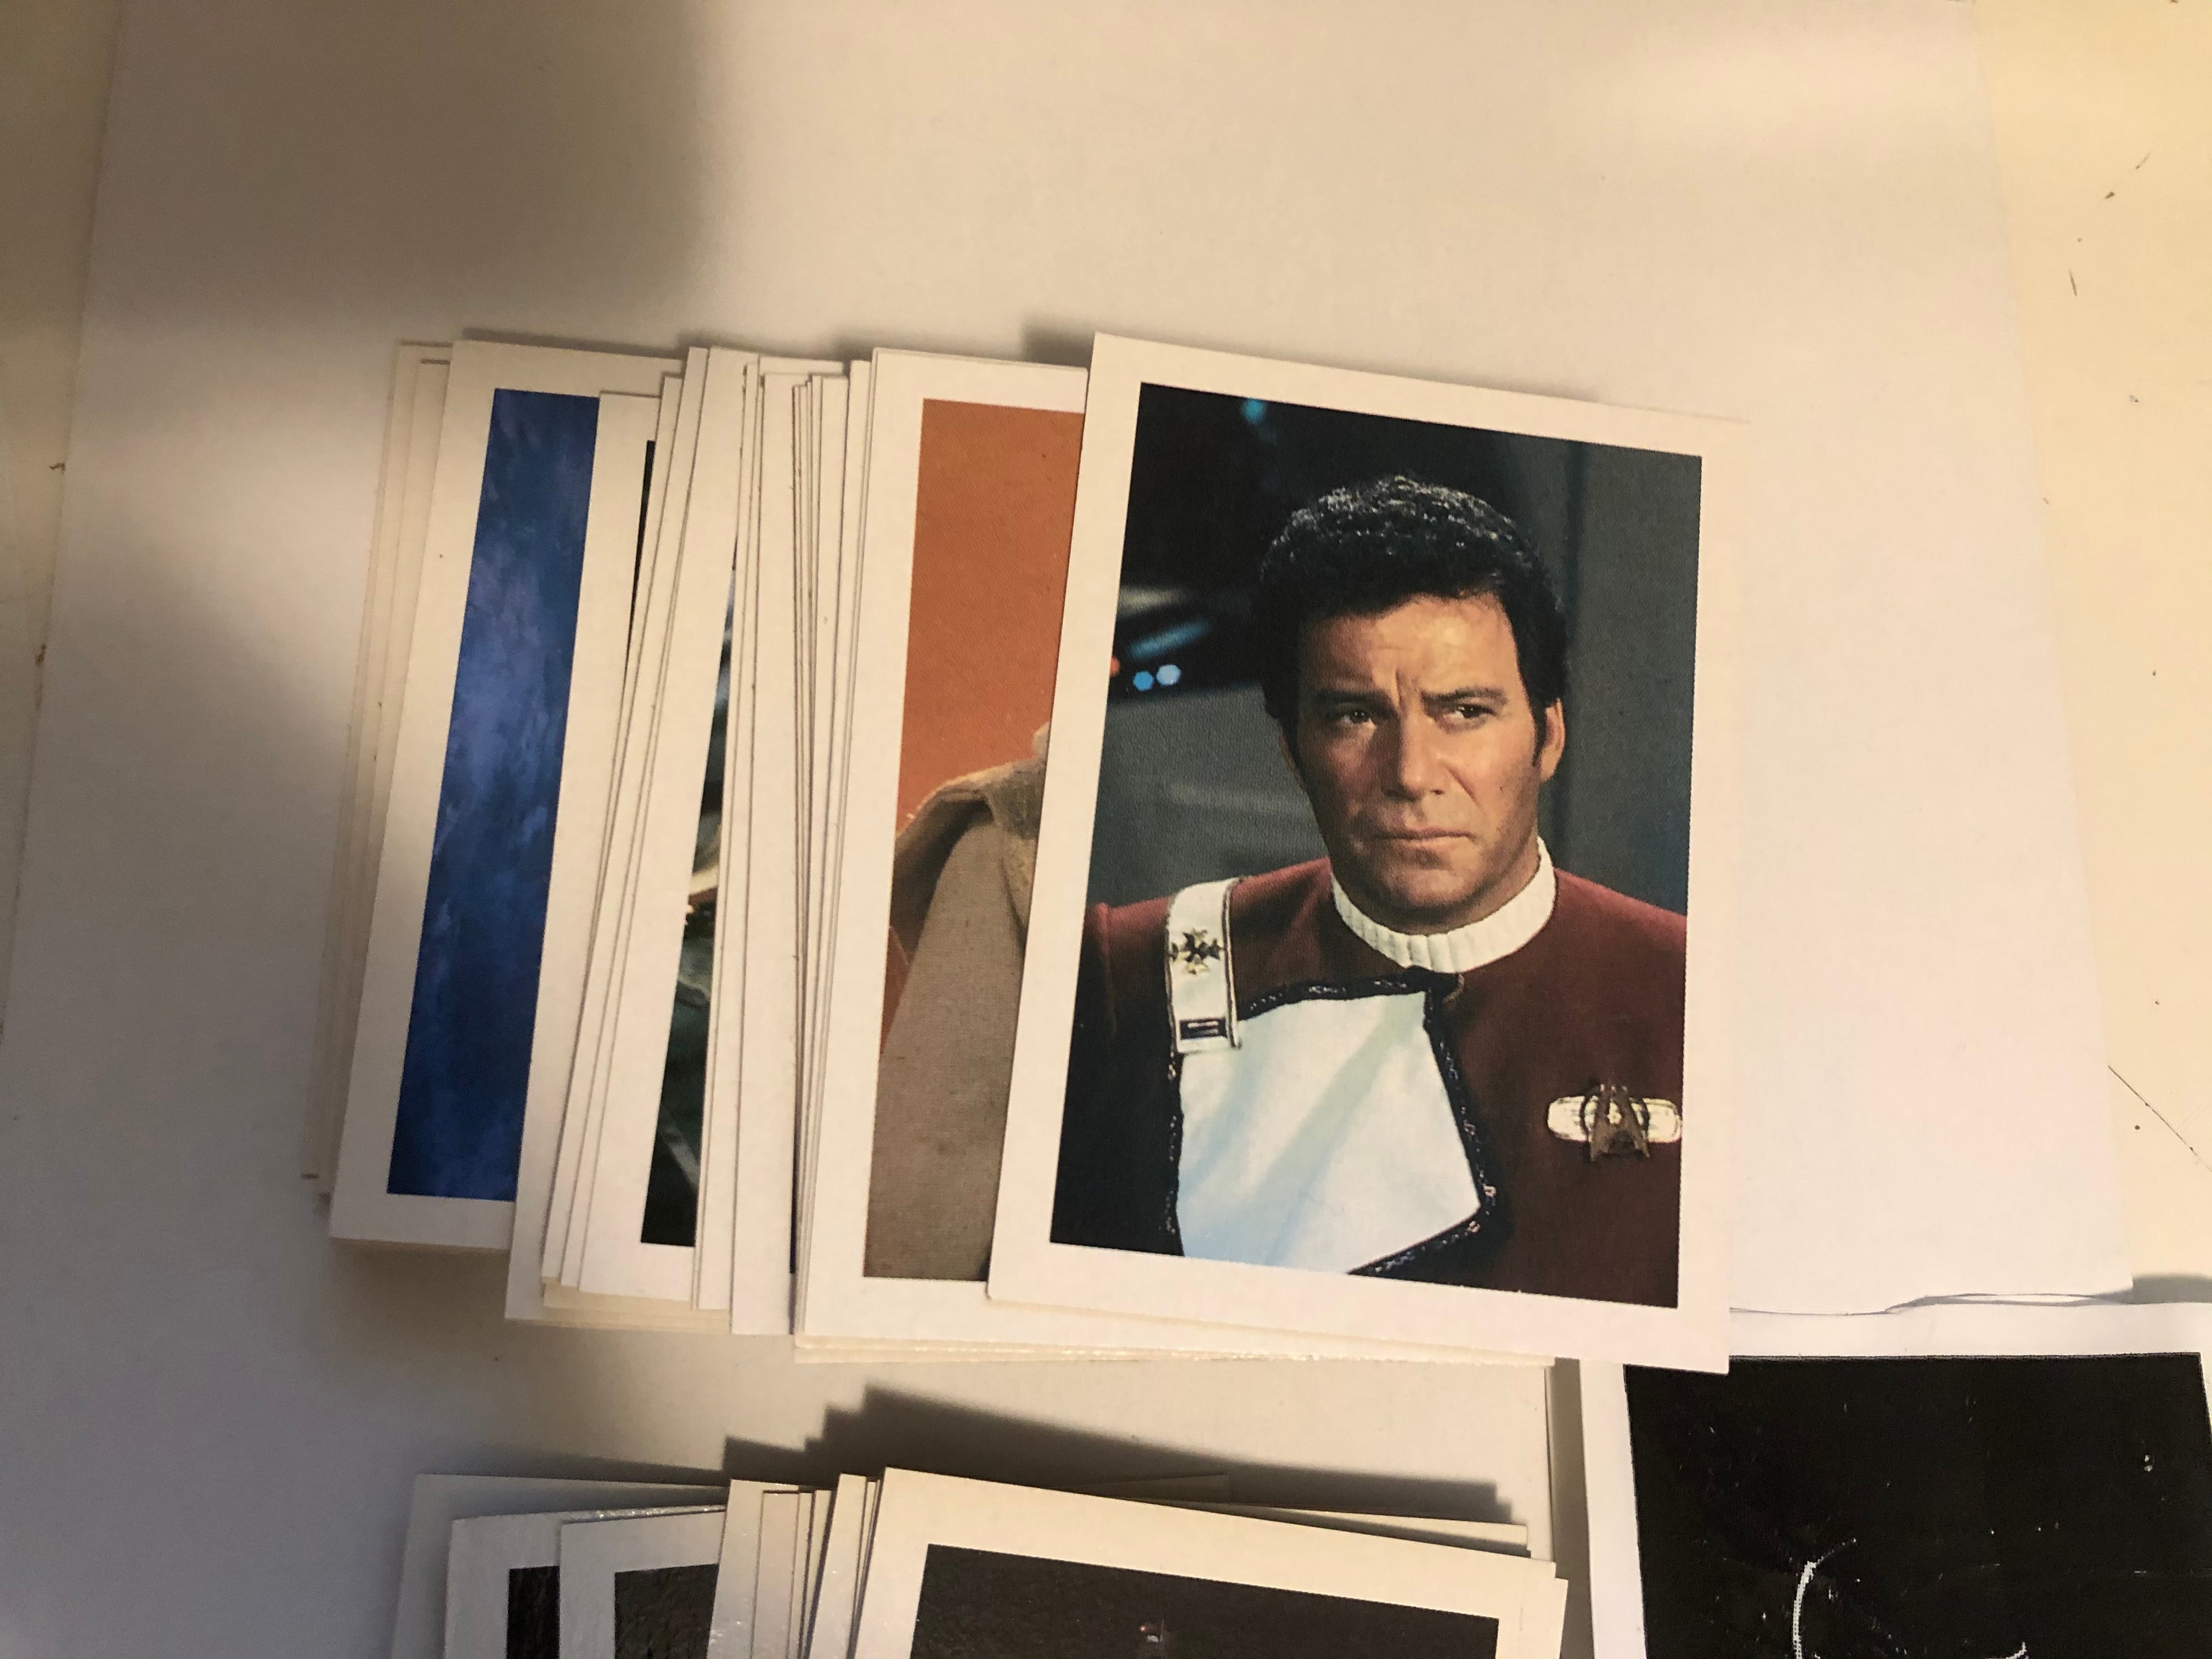 1984 FTCC Search  for Spock cards and ships insert set